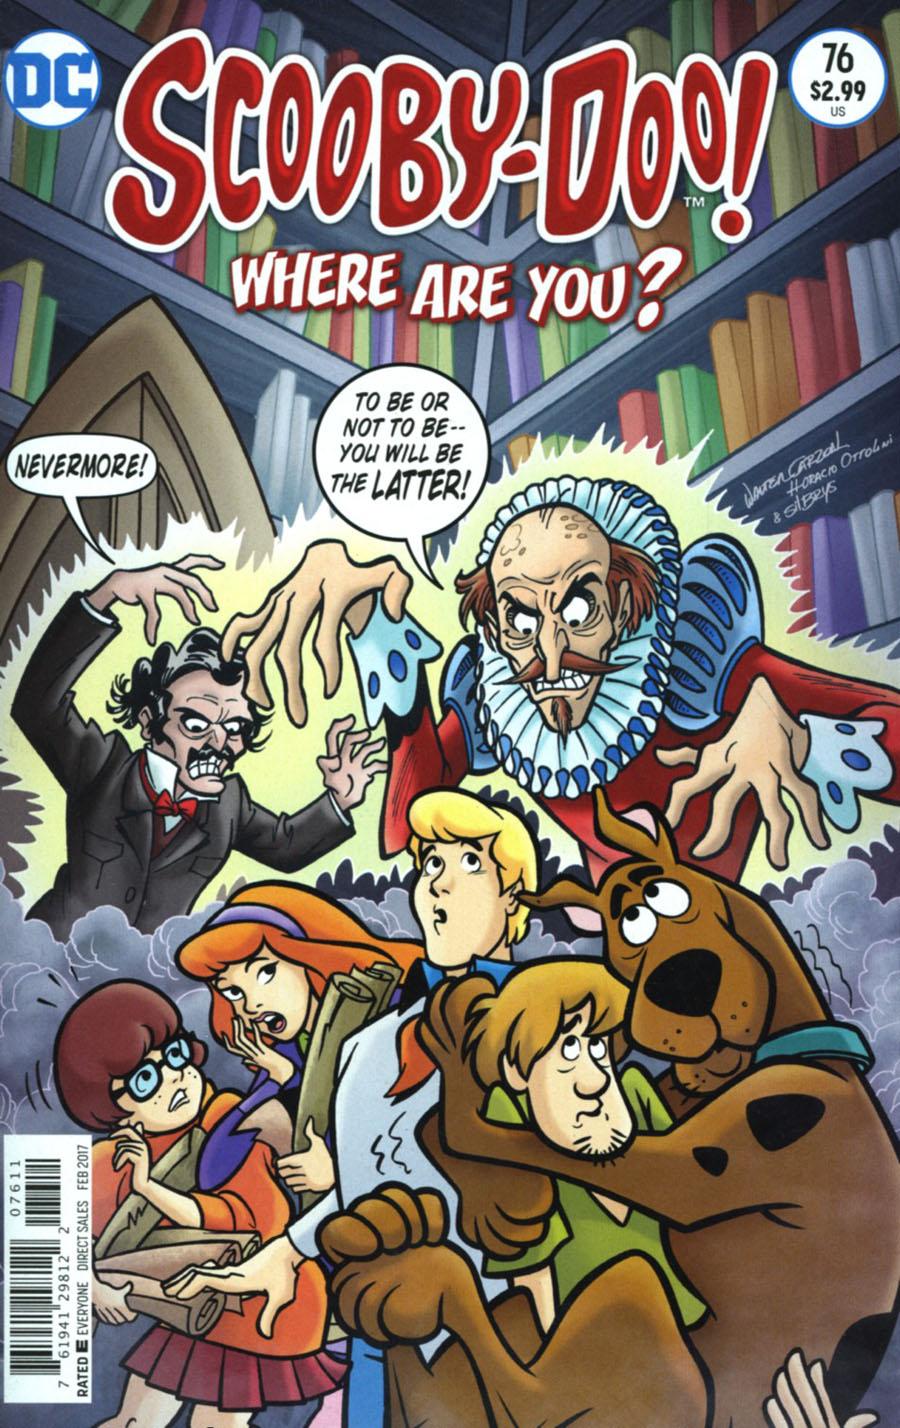 Scooby-Doo Where Are You Vol. 1 #76